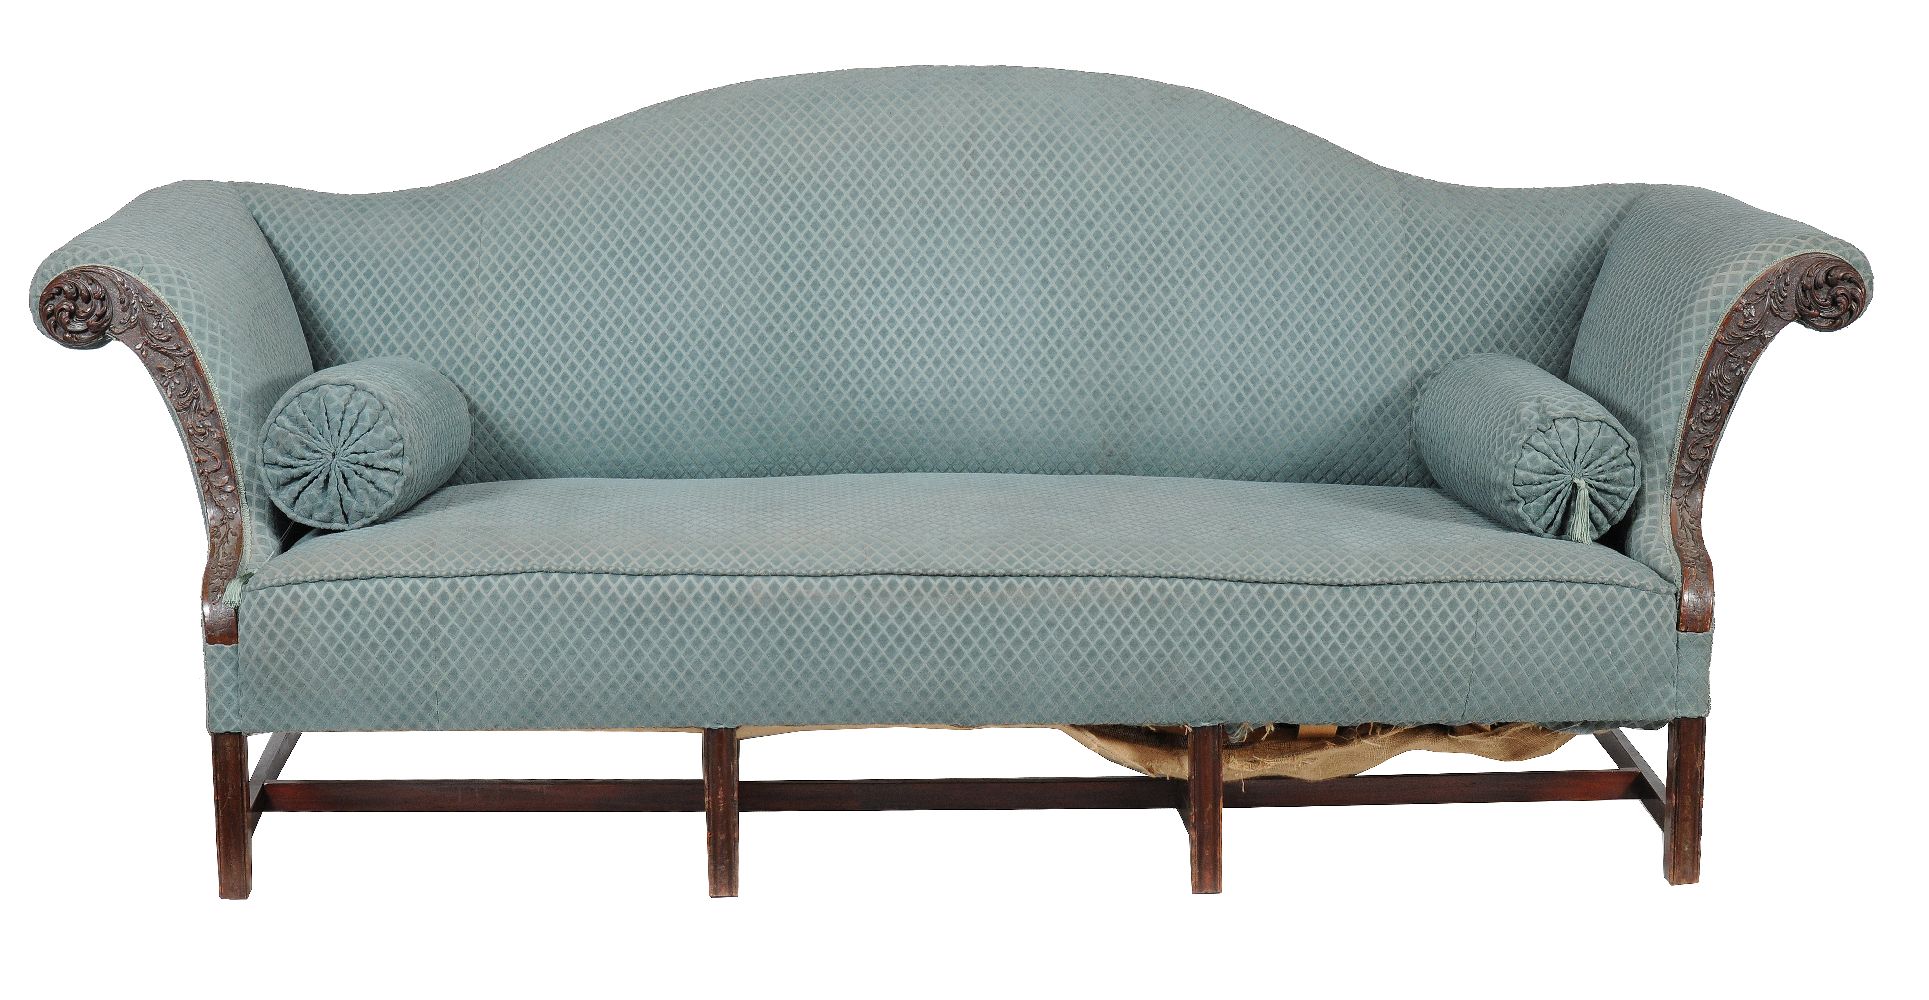 A mahogany and upholstered sofa, circa 1780 and later, the yoke shaped back above a pair of scroll